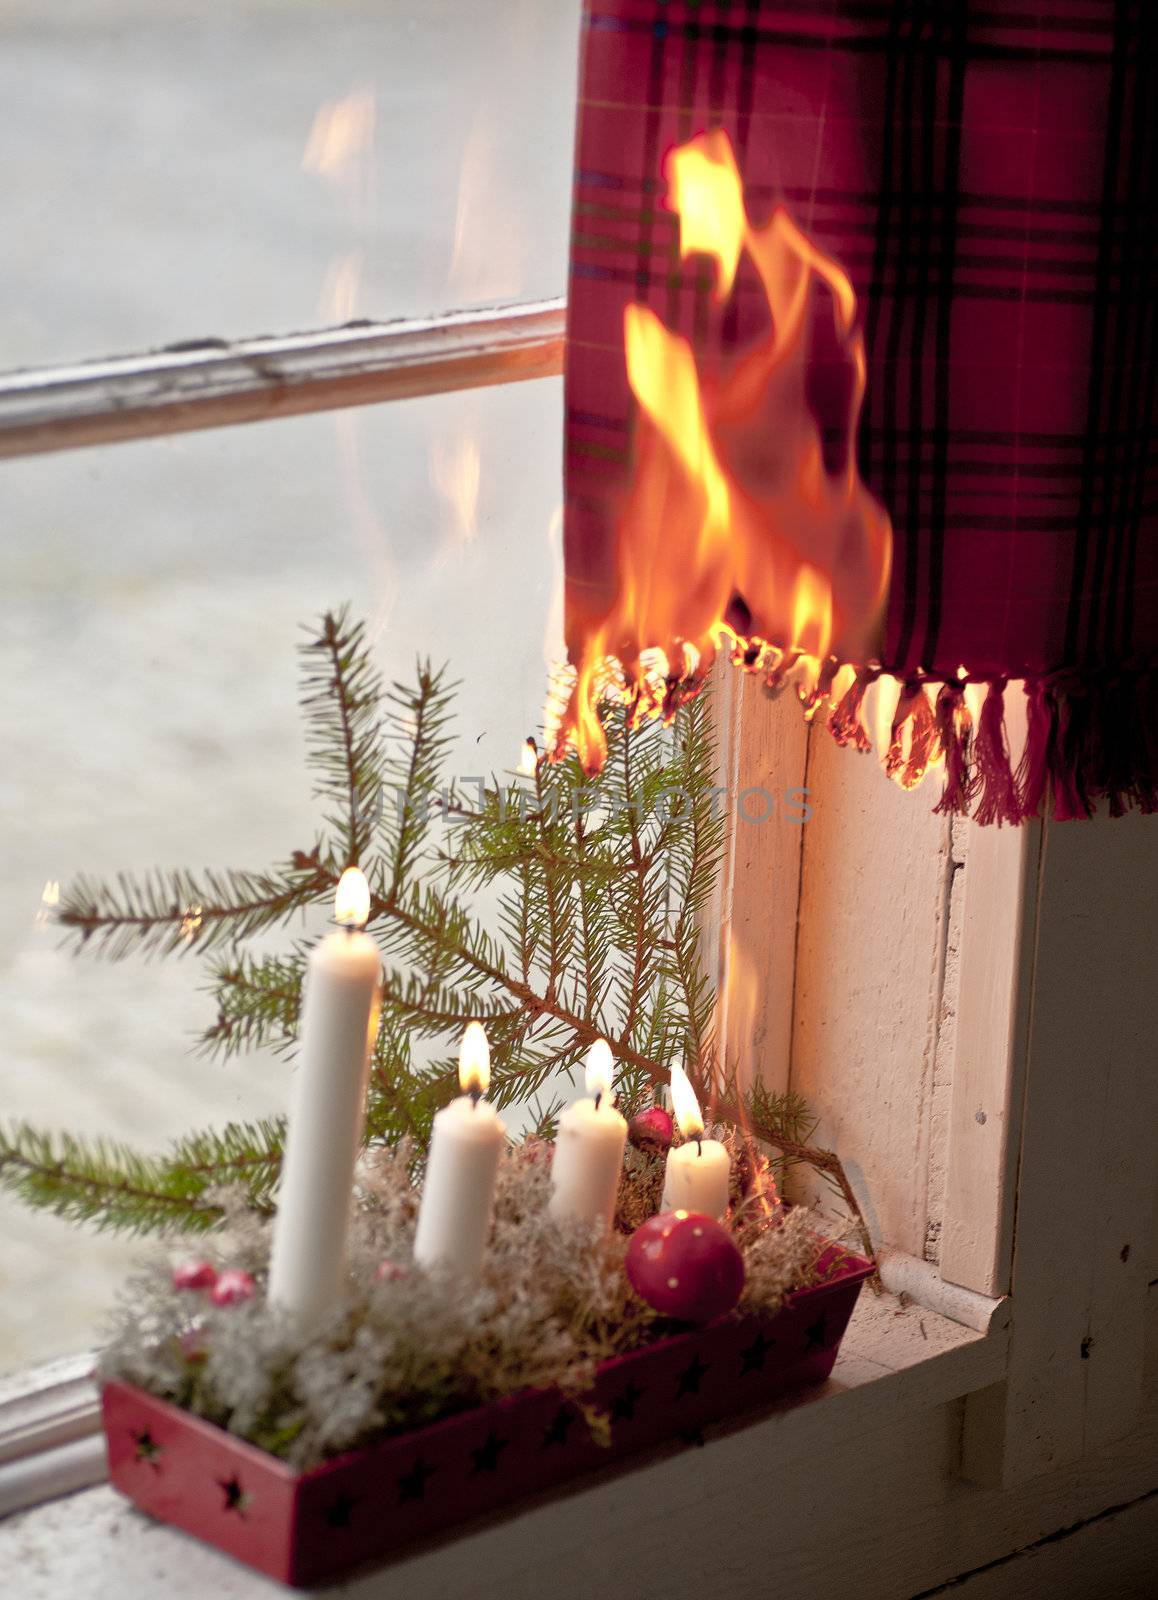 Advent candle wreath setting fire on a curtain